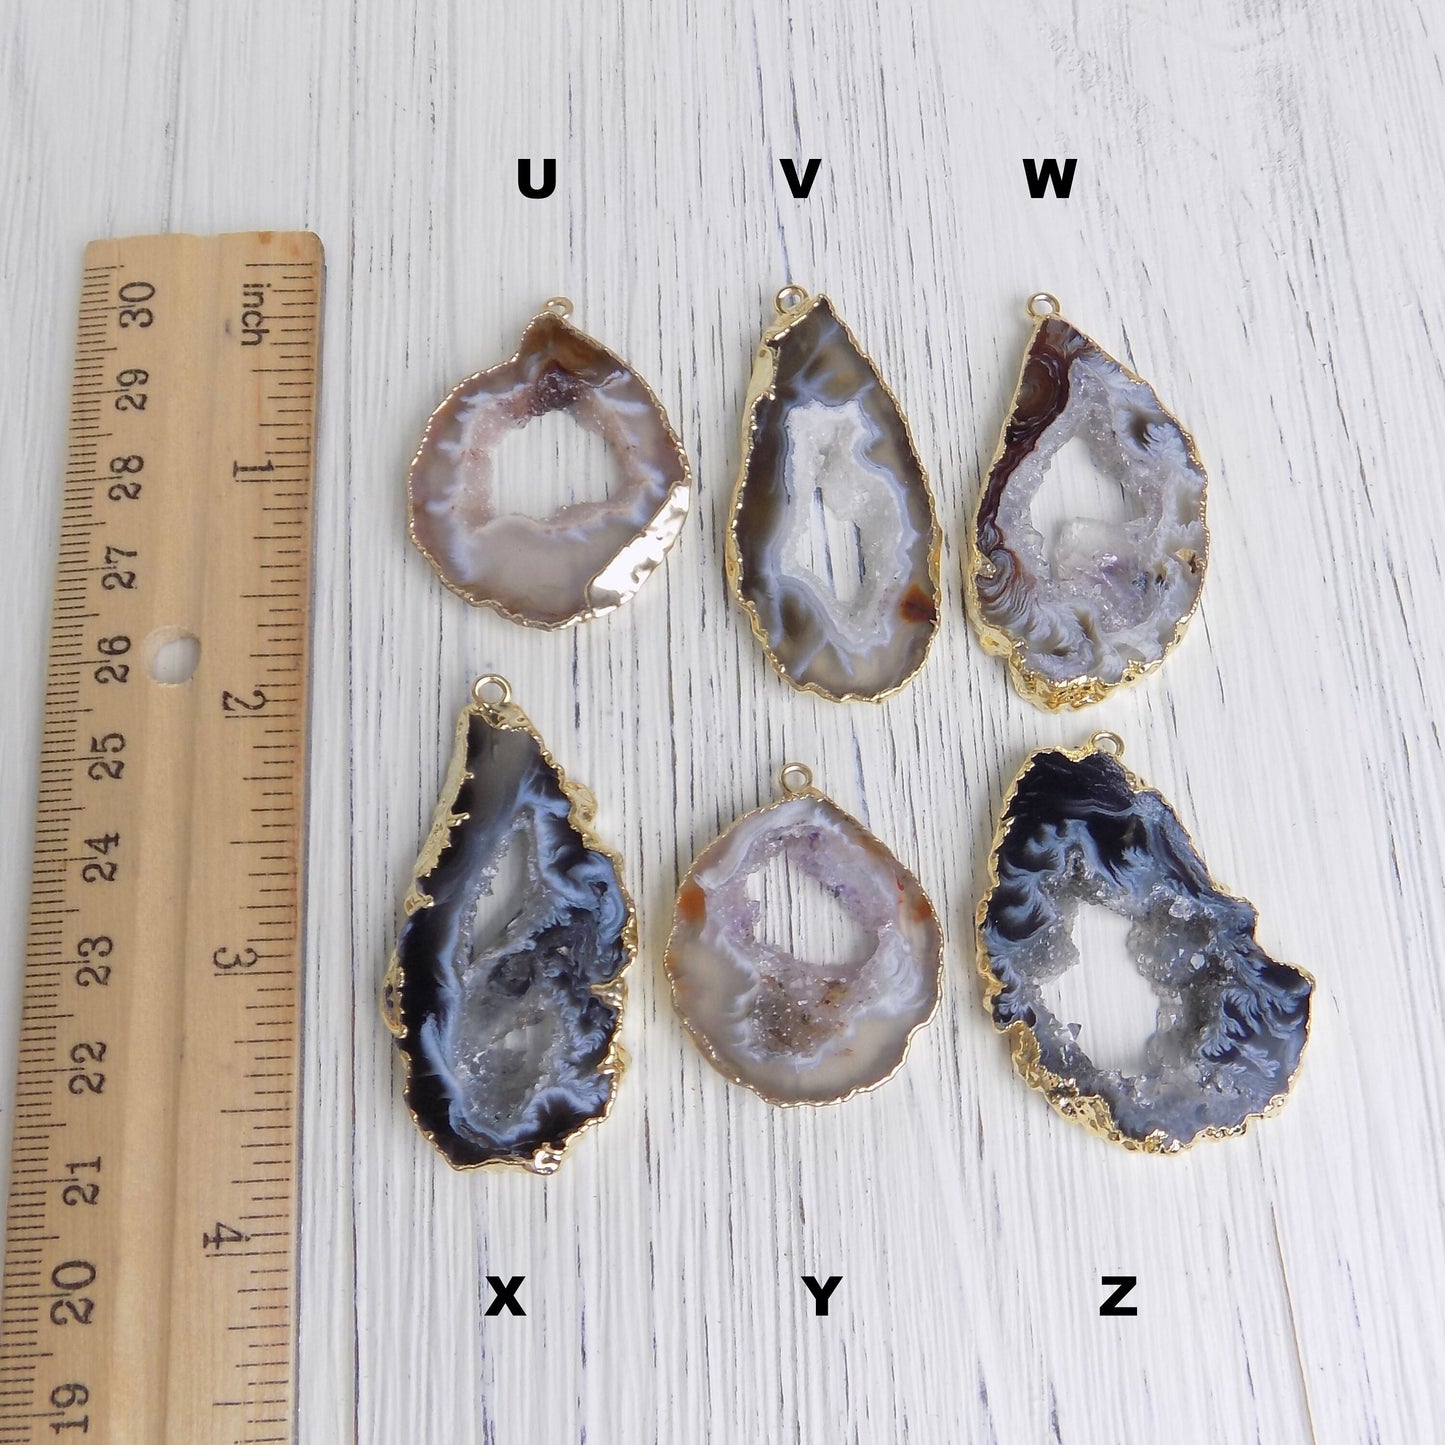 Natural Geode Necklace Gold, Large Geode Pendant, Geode Slice, Druzy Pendant, Gray Geode Slice, Long Layer, Custom Personalized Gift G13-15